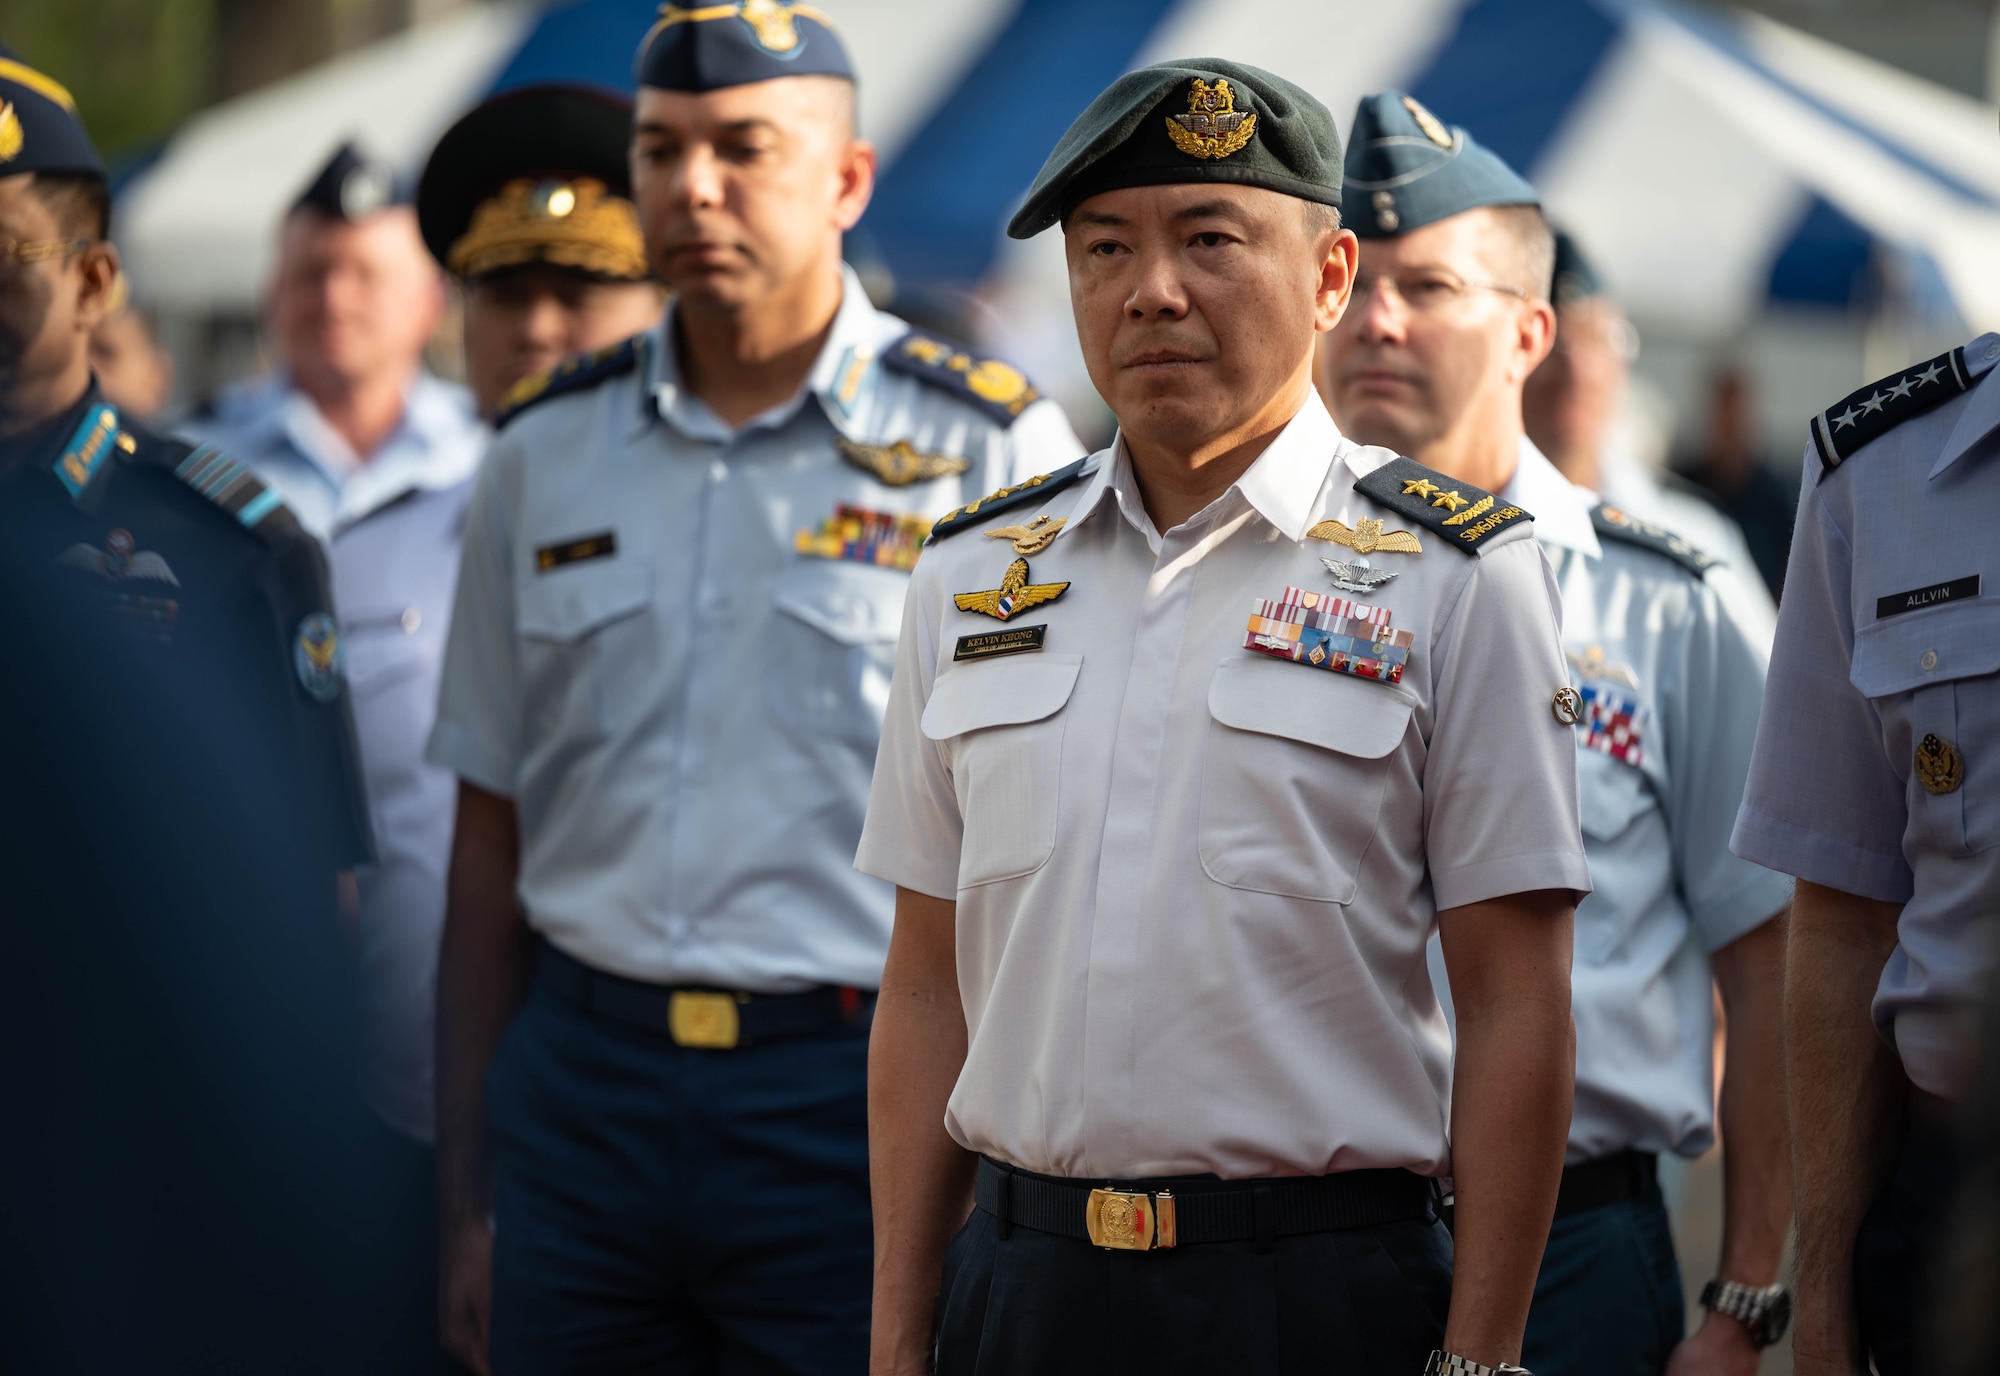 Maj. Gen. Kelvin Khong, Chief of the Republic of Singapore Air Force, stands in formation during the opening ceremony of the Pacific Air Chiefs Symposium 2023 at Joint Base Pearl Harbor-Hickam, Hawaii, Nov. 14, 2023. During the symposium, the senior leaders focused on applying global lessons from recent events and the necessity to preserve peace and prevent conflict in the region. (U.S. Air Force photo by Staff Sgt. Alan Ricker)